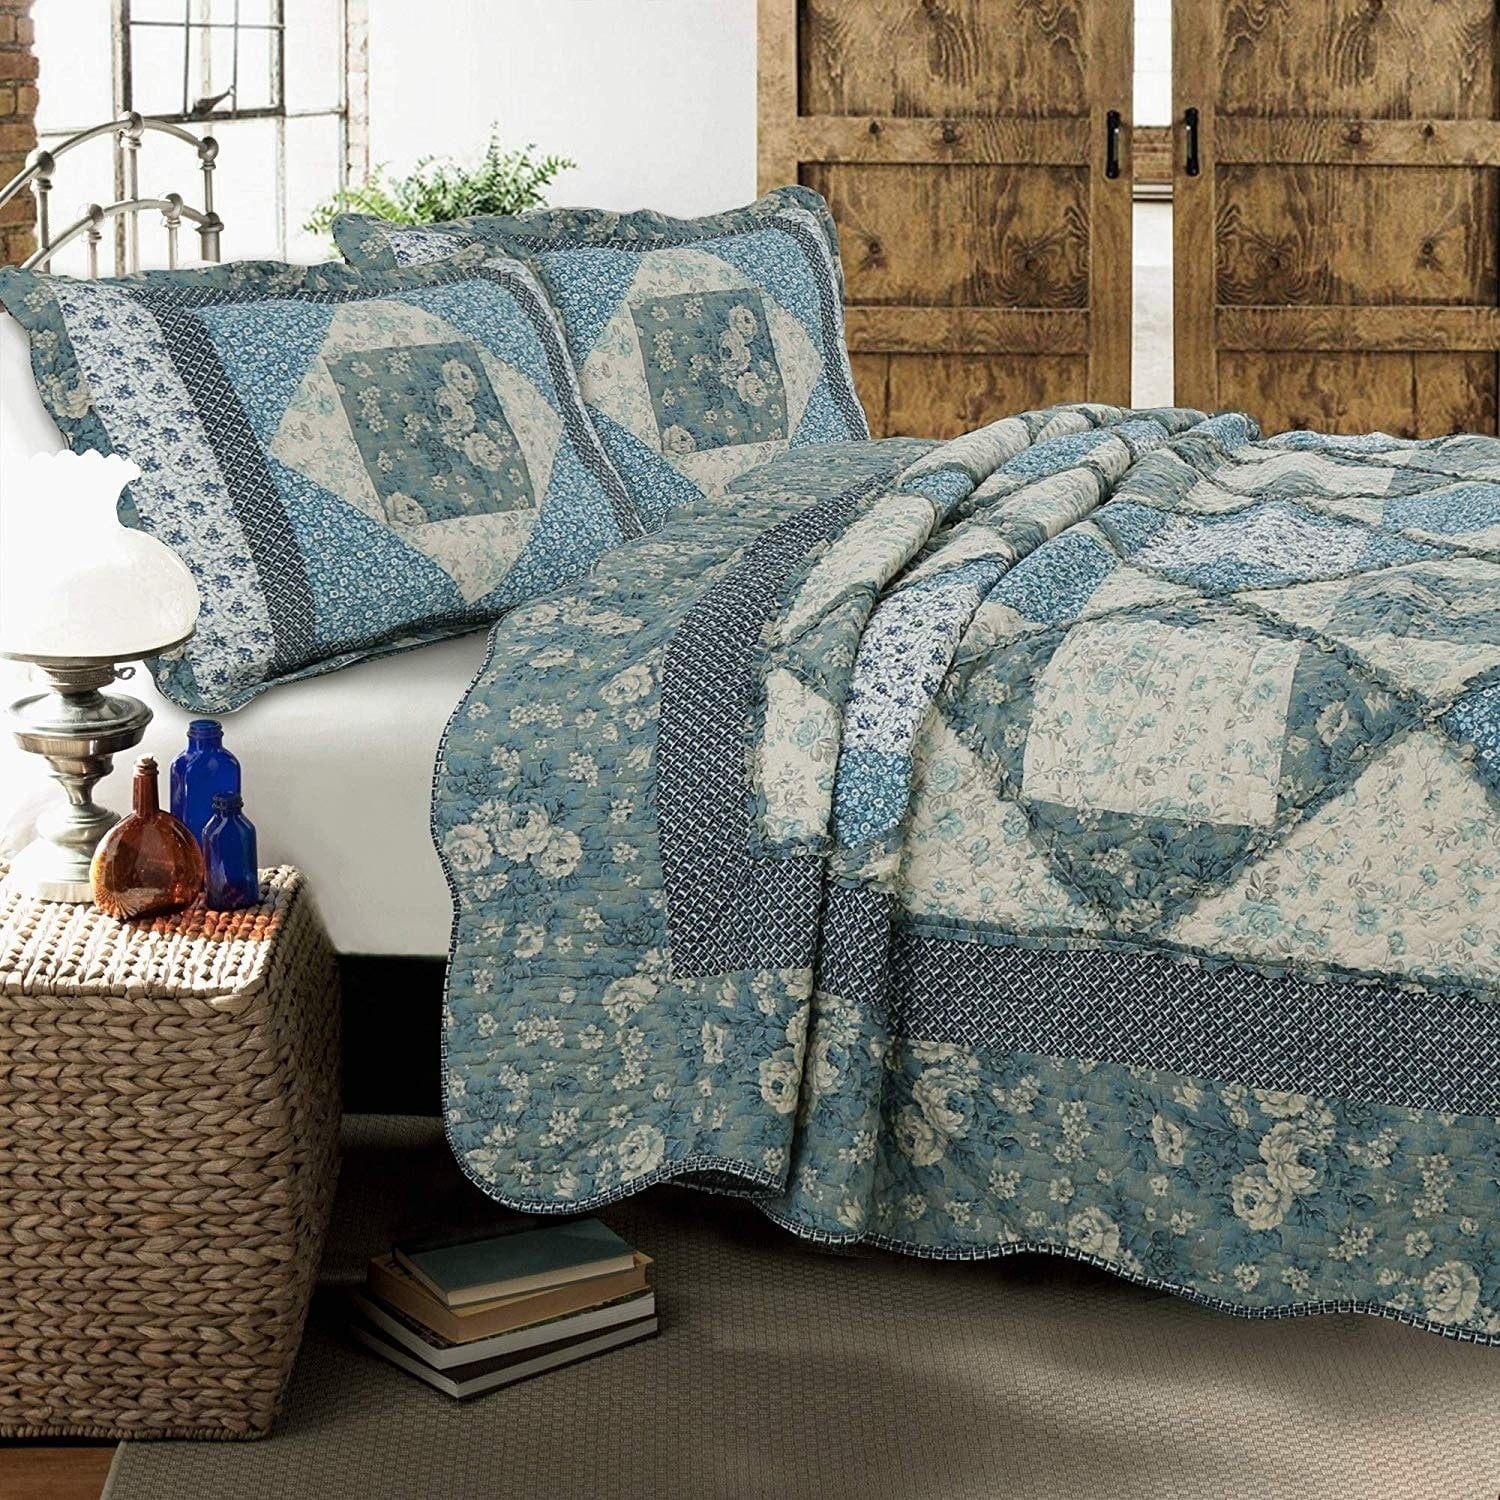 3 Piece Quilted Patchwork Bedspread Printed Comforter Throw Set double king size 